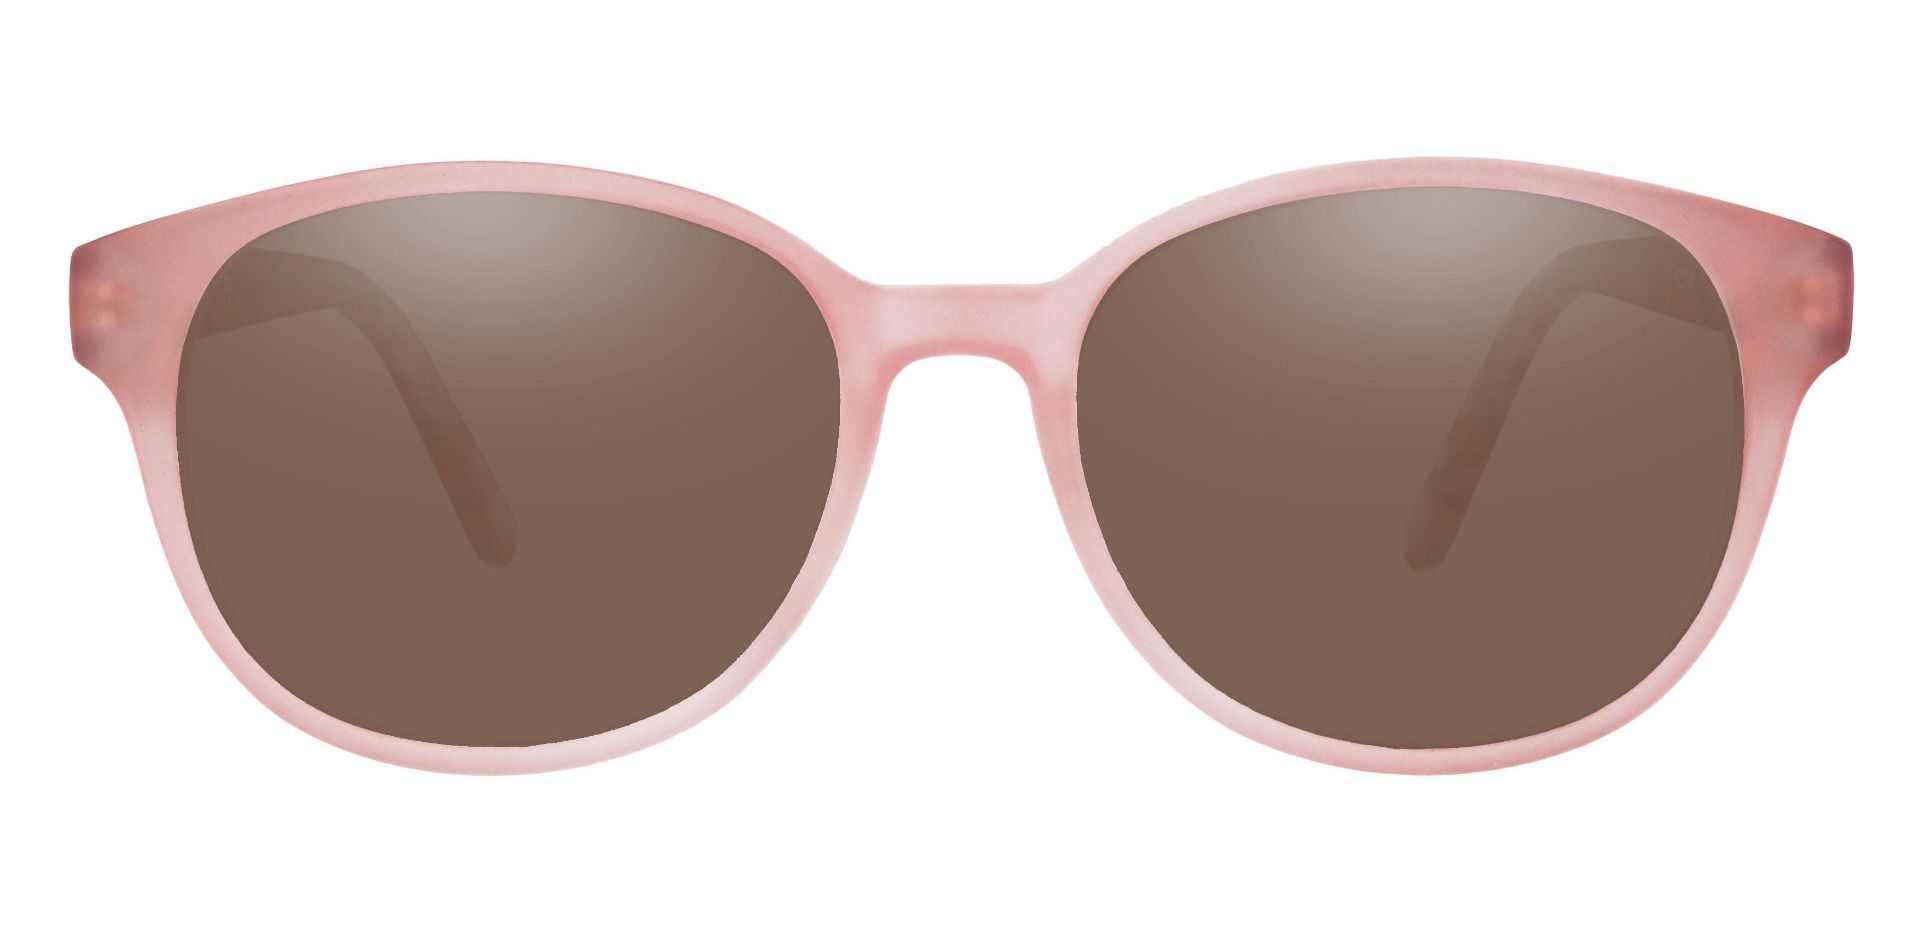 Allegra Oval Non-Rx Sunglasses - Pink Frame With Brown Lenses